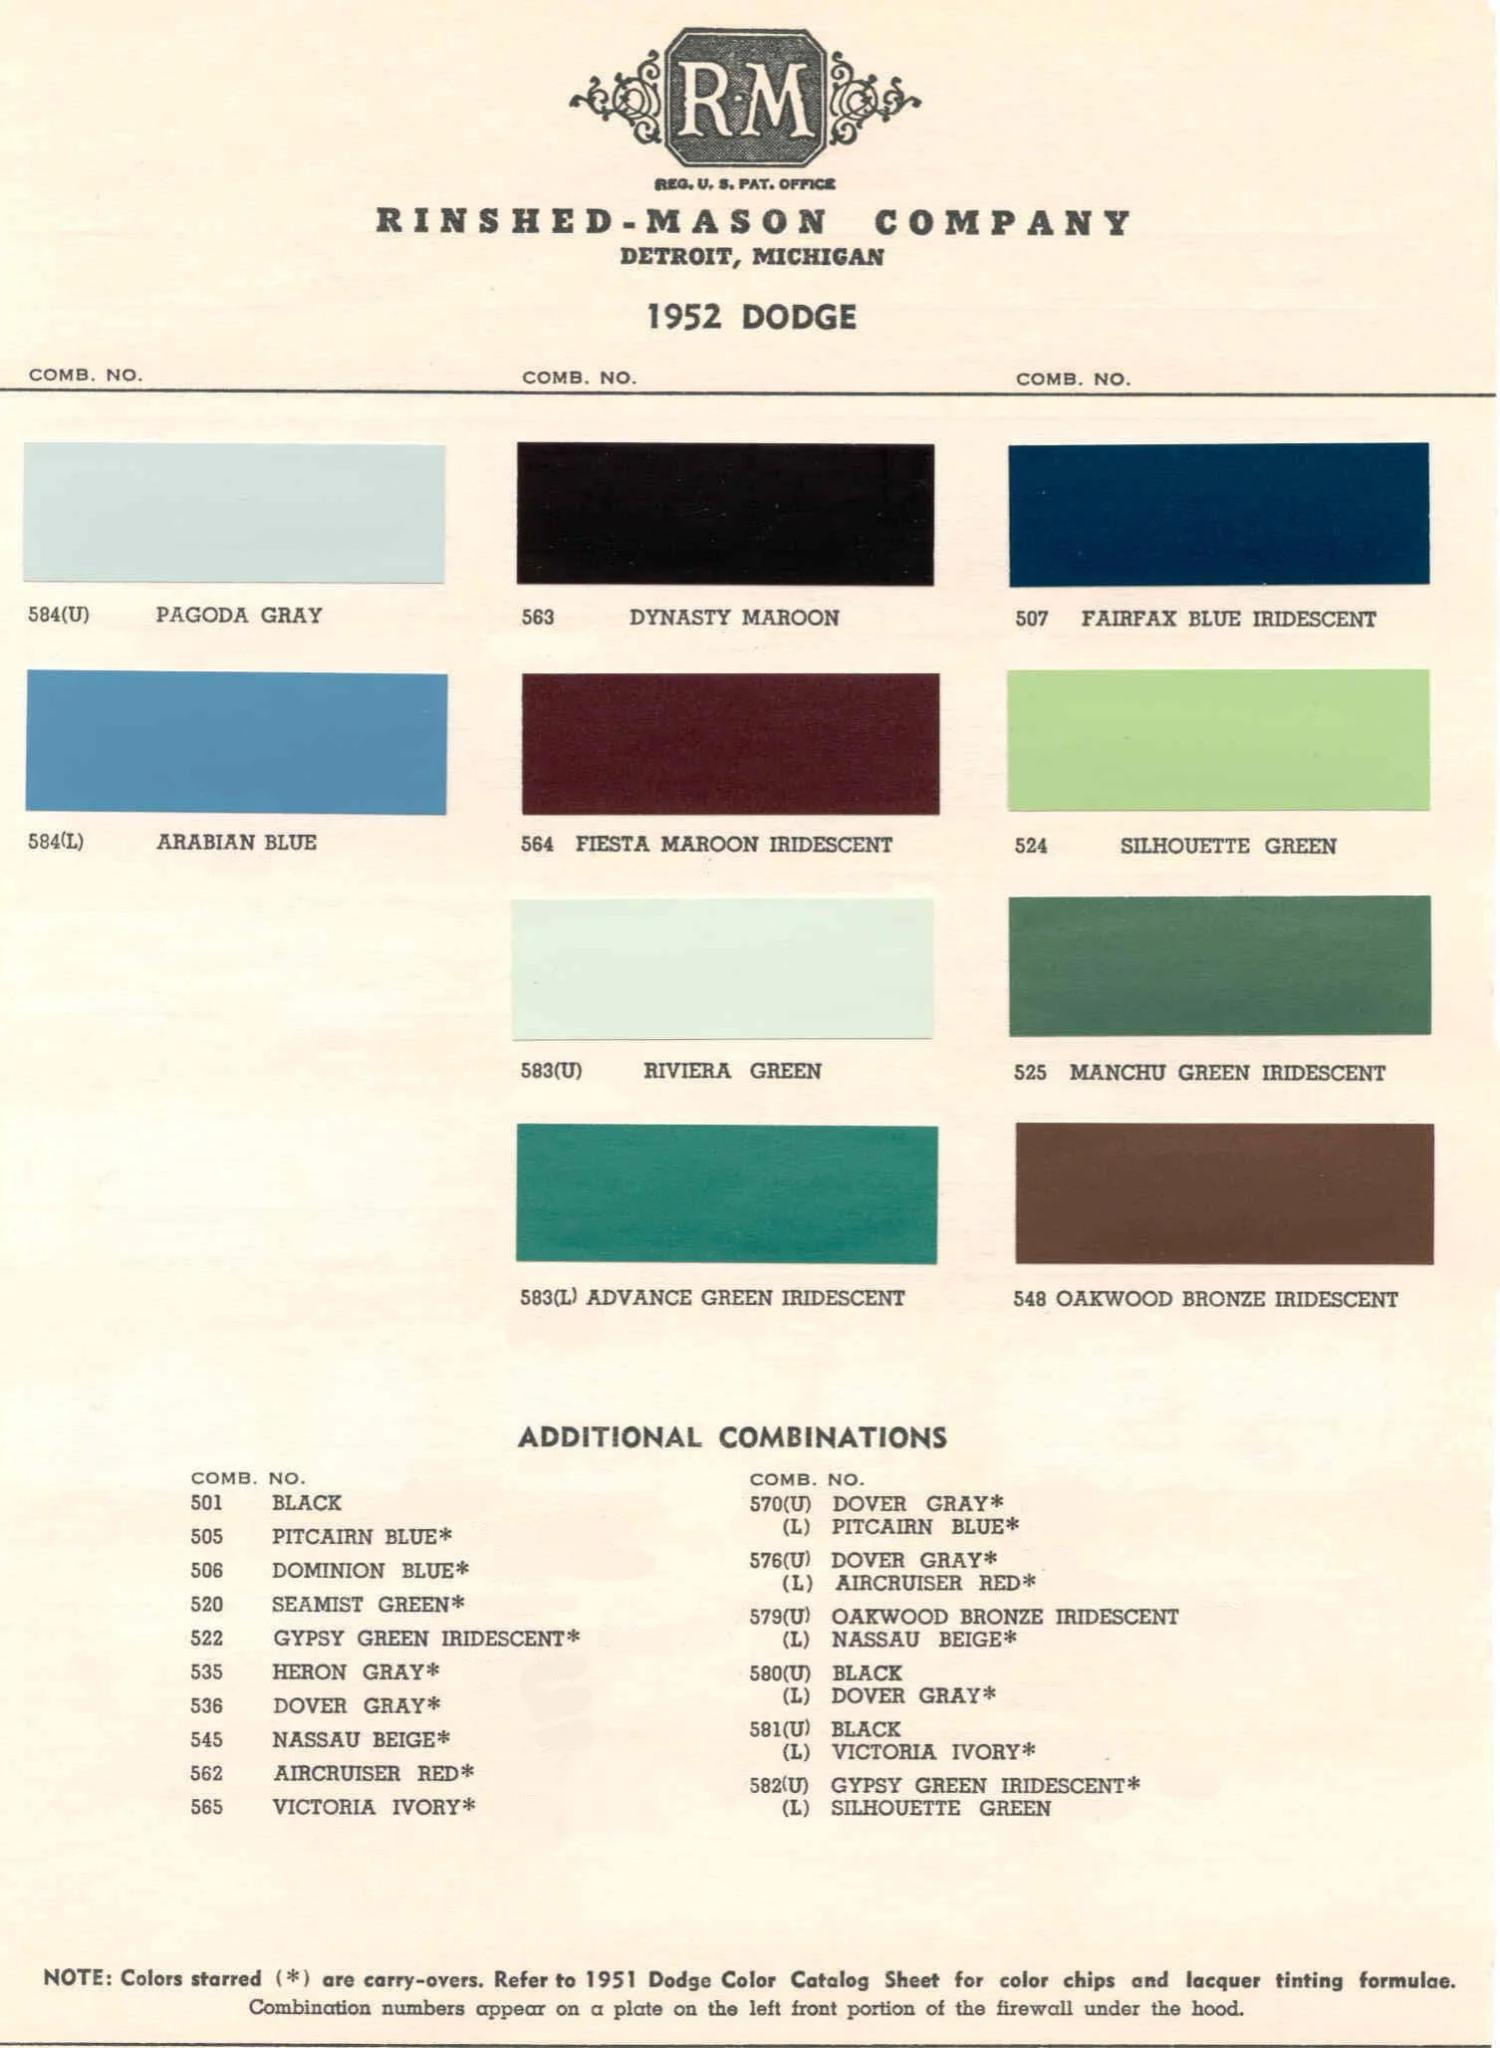 Summary Of Colors used on all Dodge Vehicles in 1952